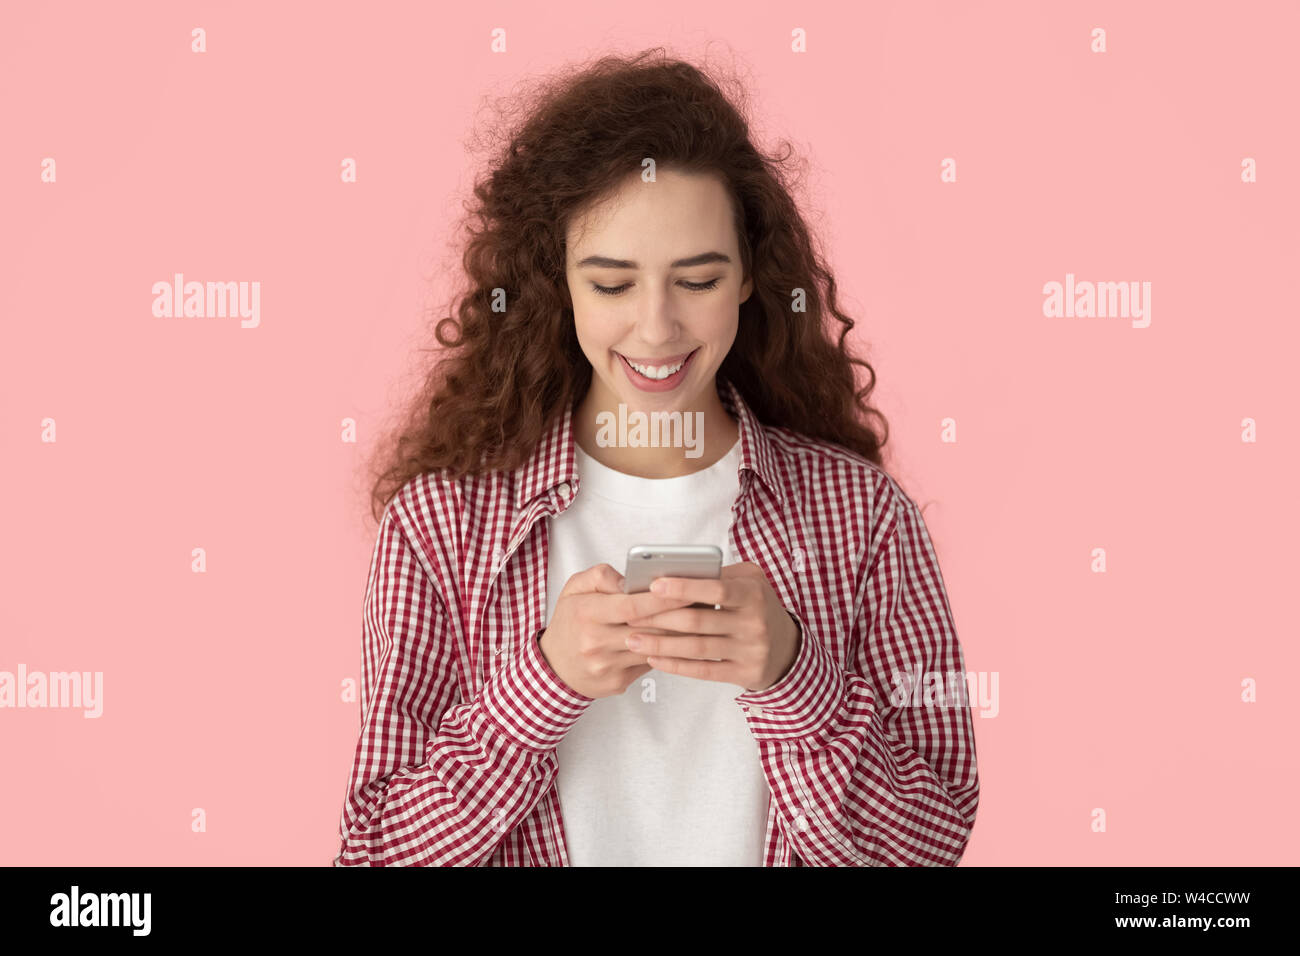 Young woman chatting using smartphone posing isolated on pink background Stock Photo